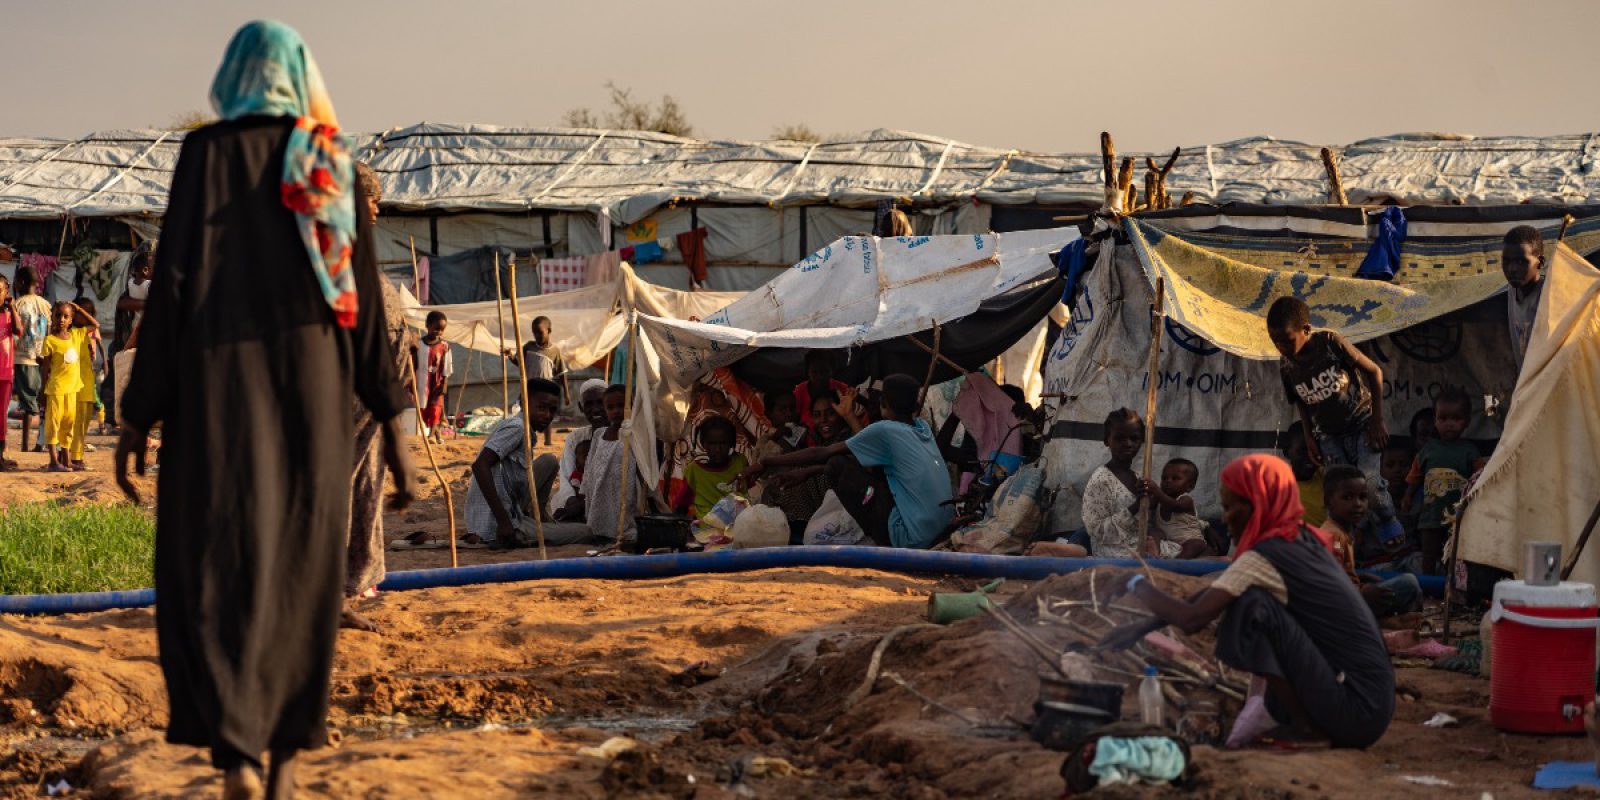 Shane Burke, JRS Eastern Africa Deputy Regional Director, describes the reality faced by the people of Sudan. Renk transit centre, at the border between Sudan and South Sudan (Jesuit Refugee Service).